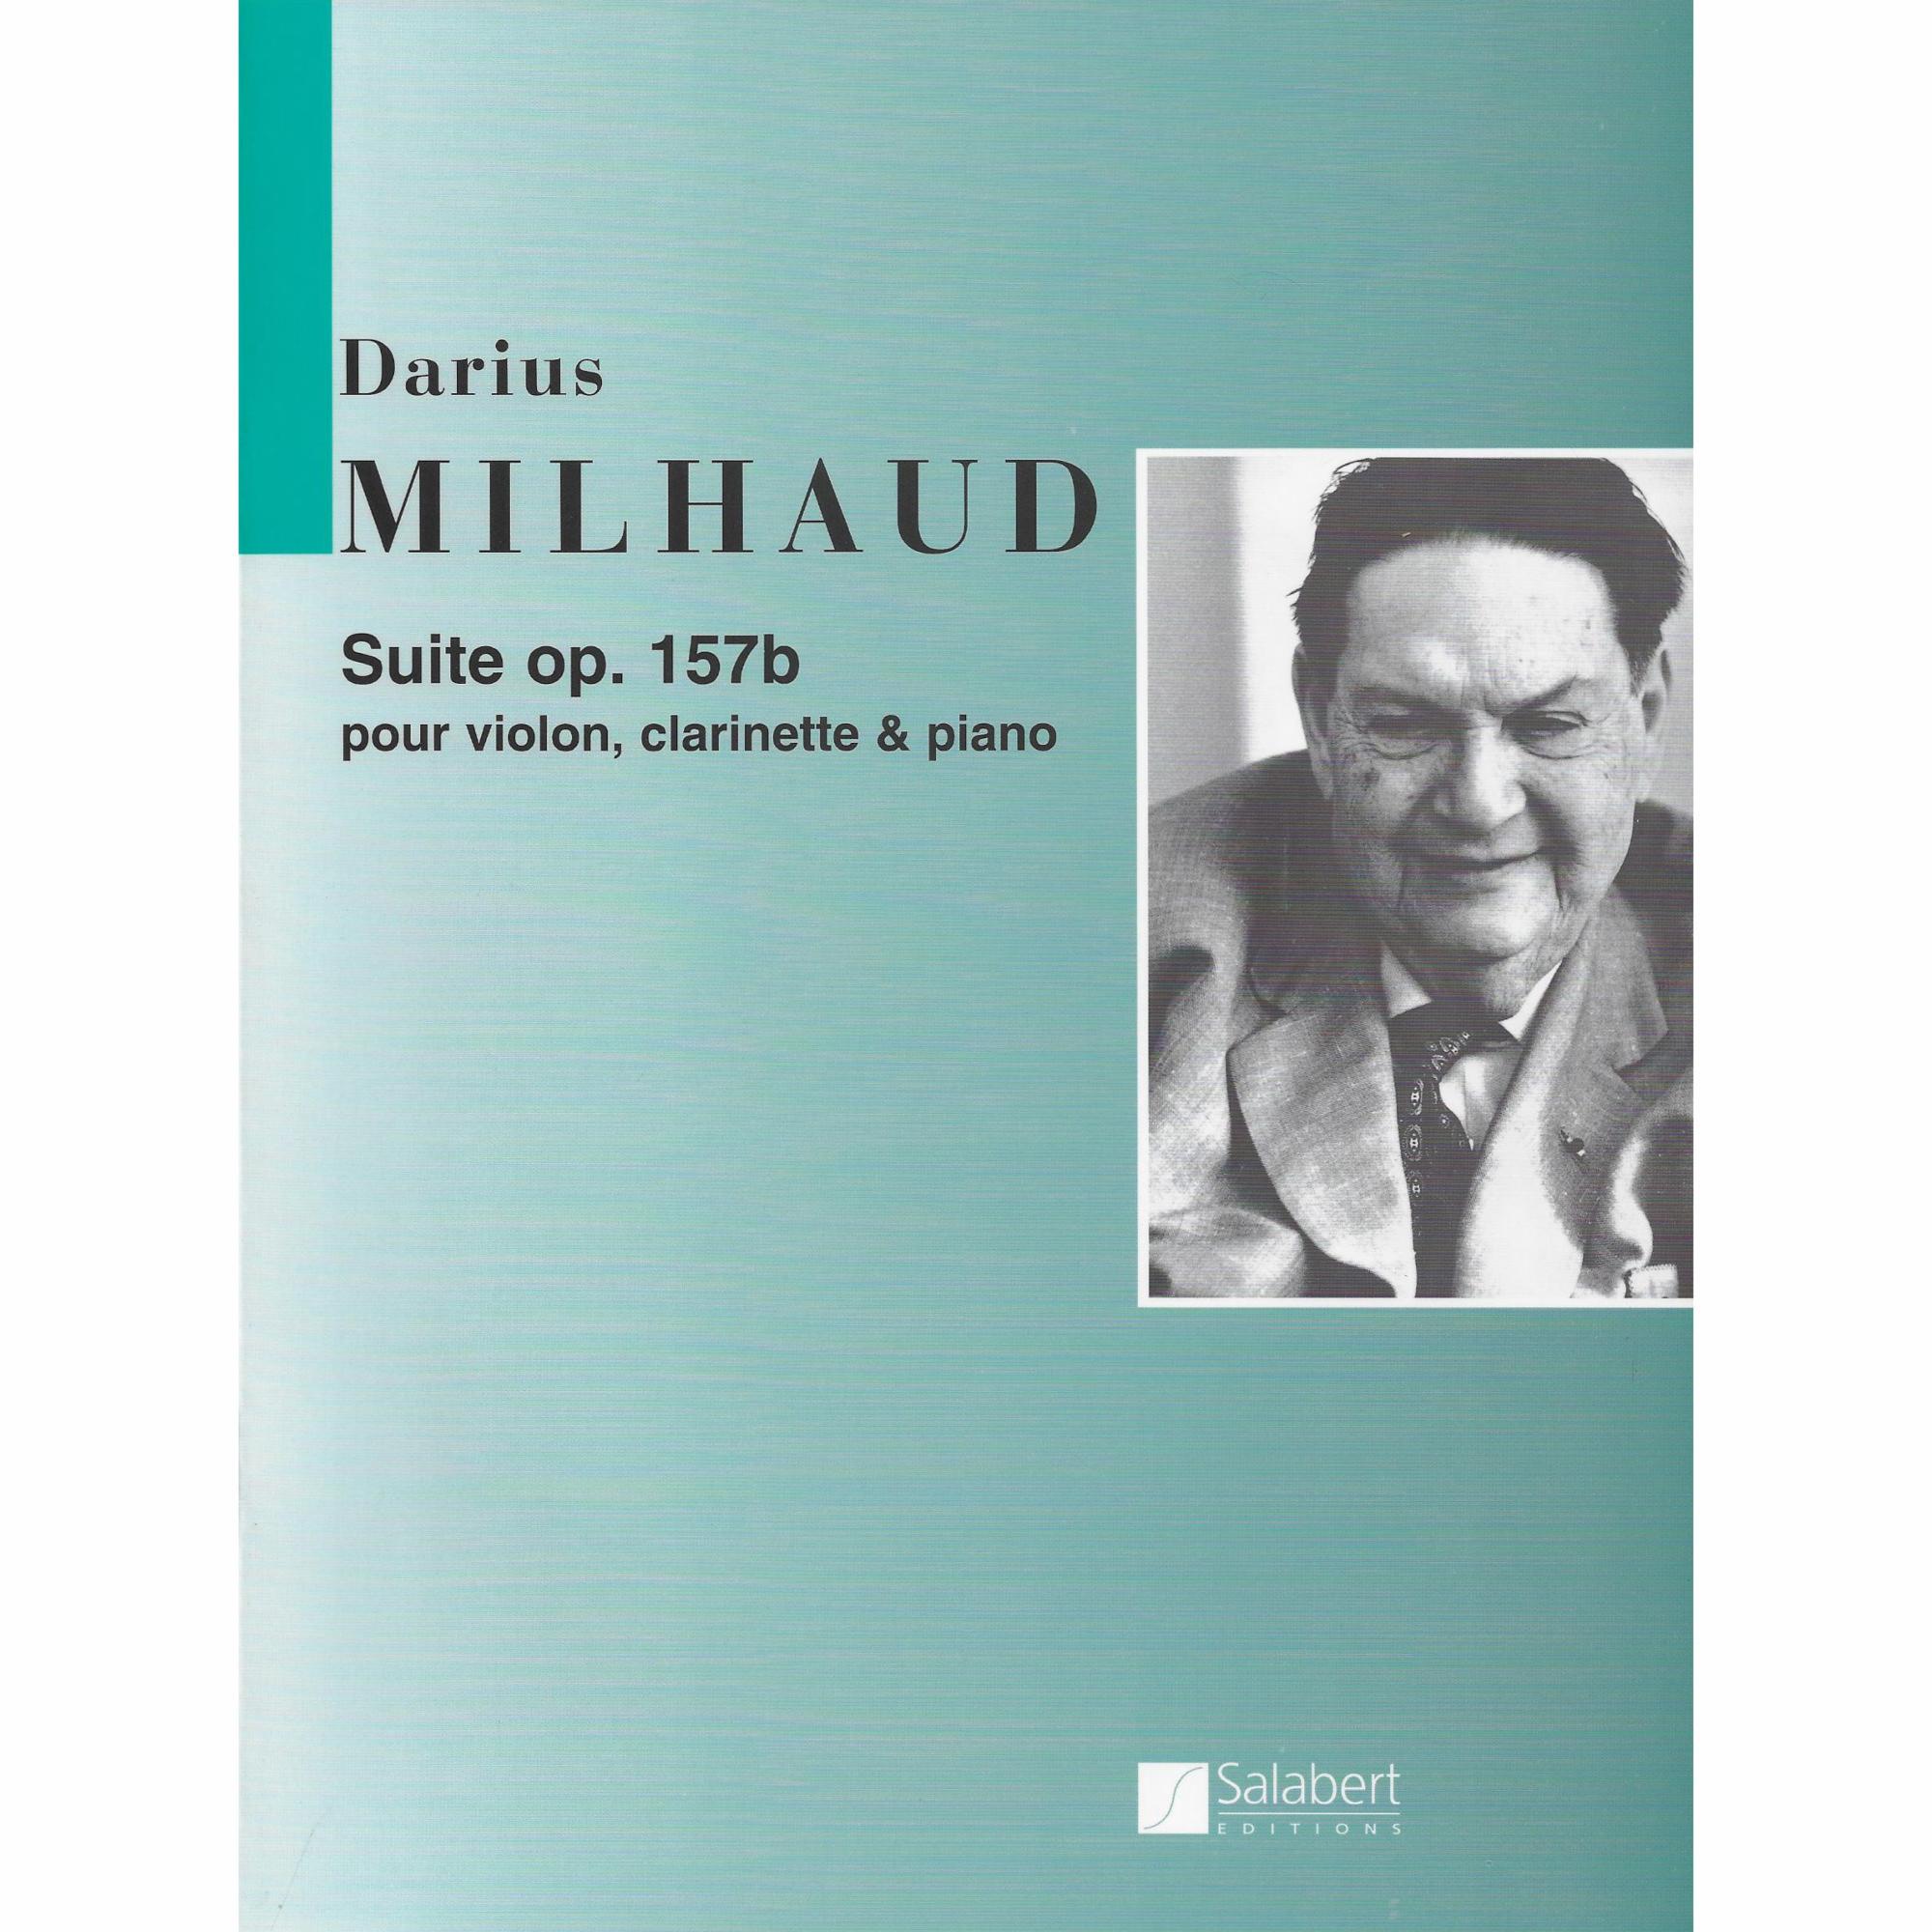 Milhaud -- Suite, Op. 157b for Violin, Clarinet and Piano